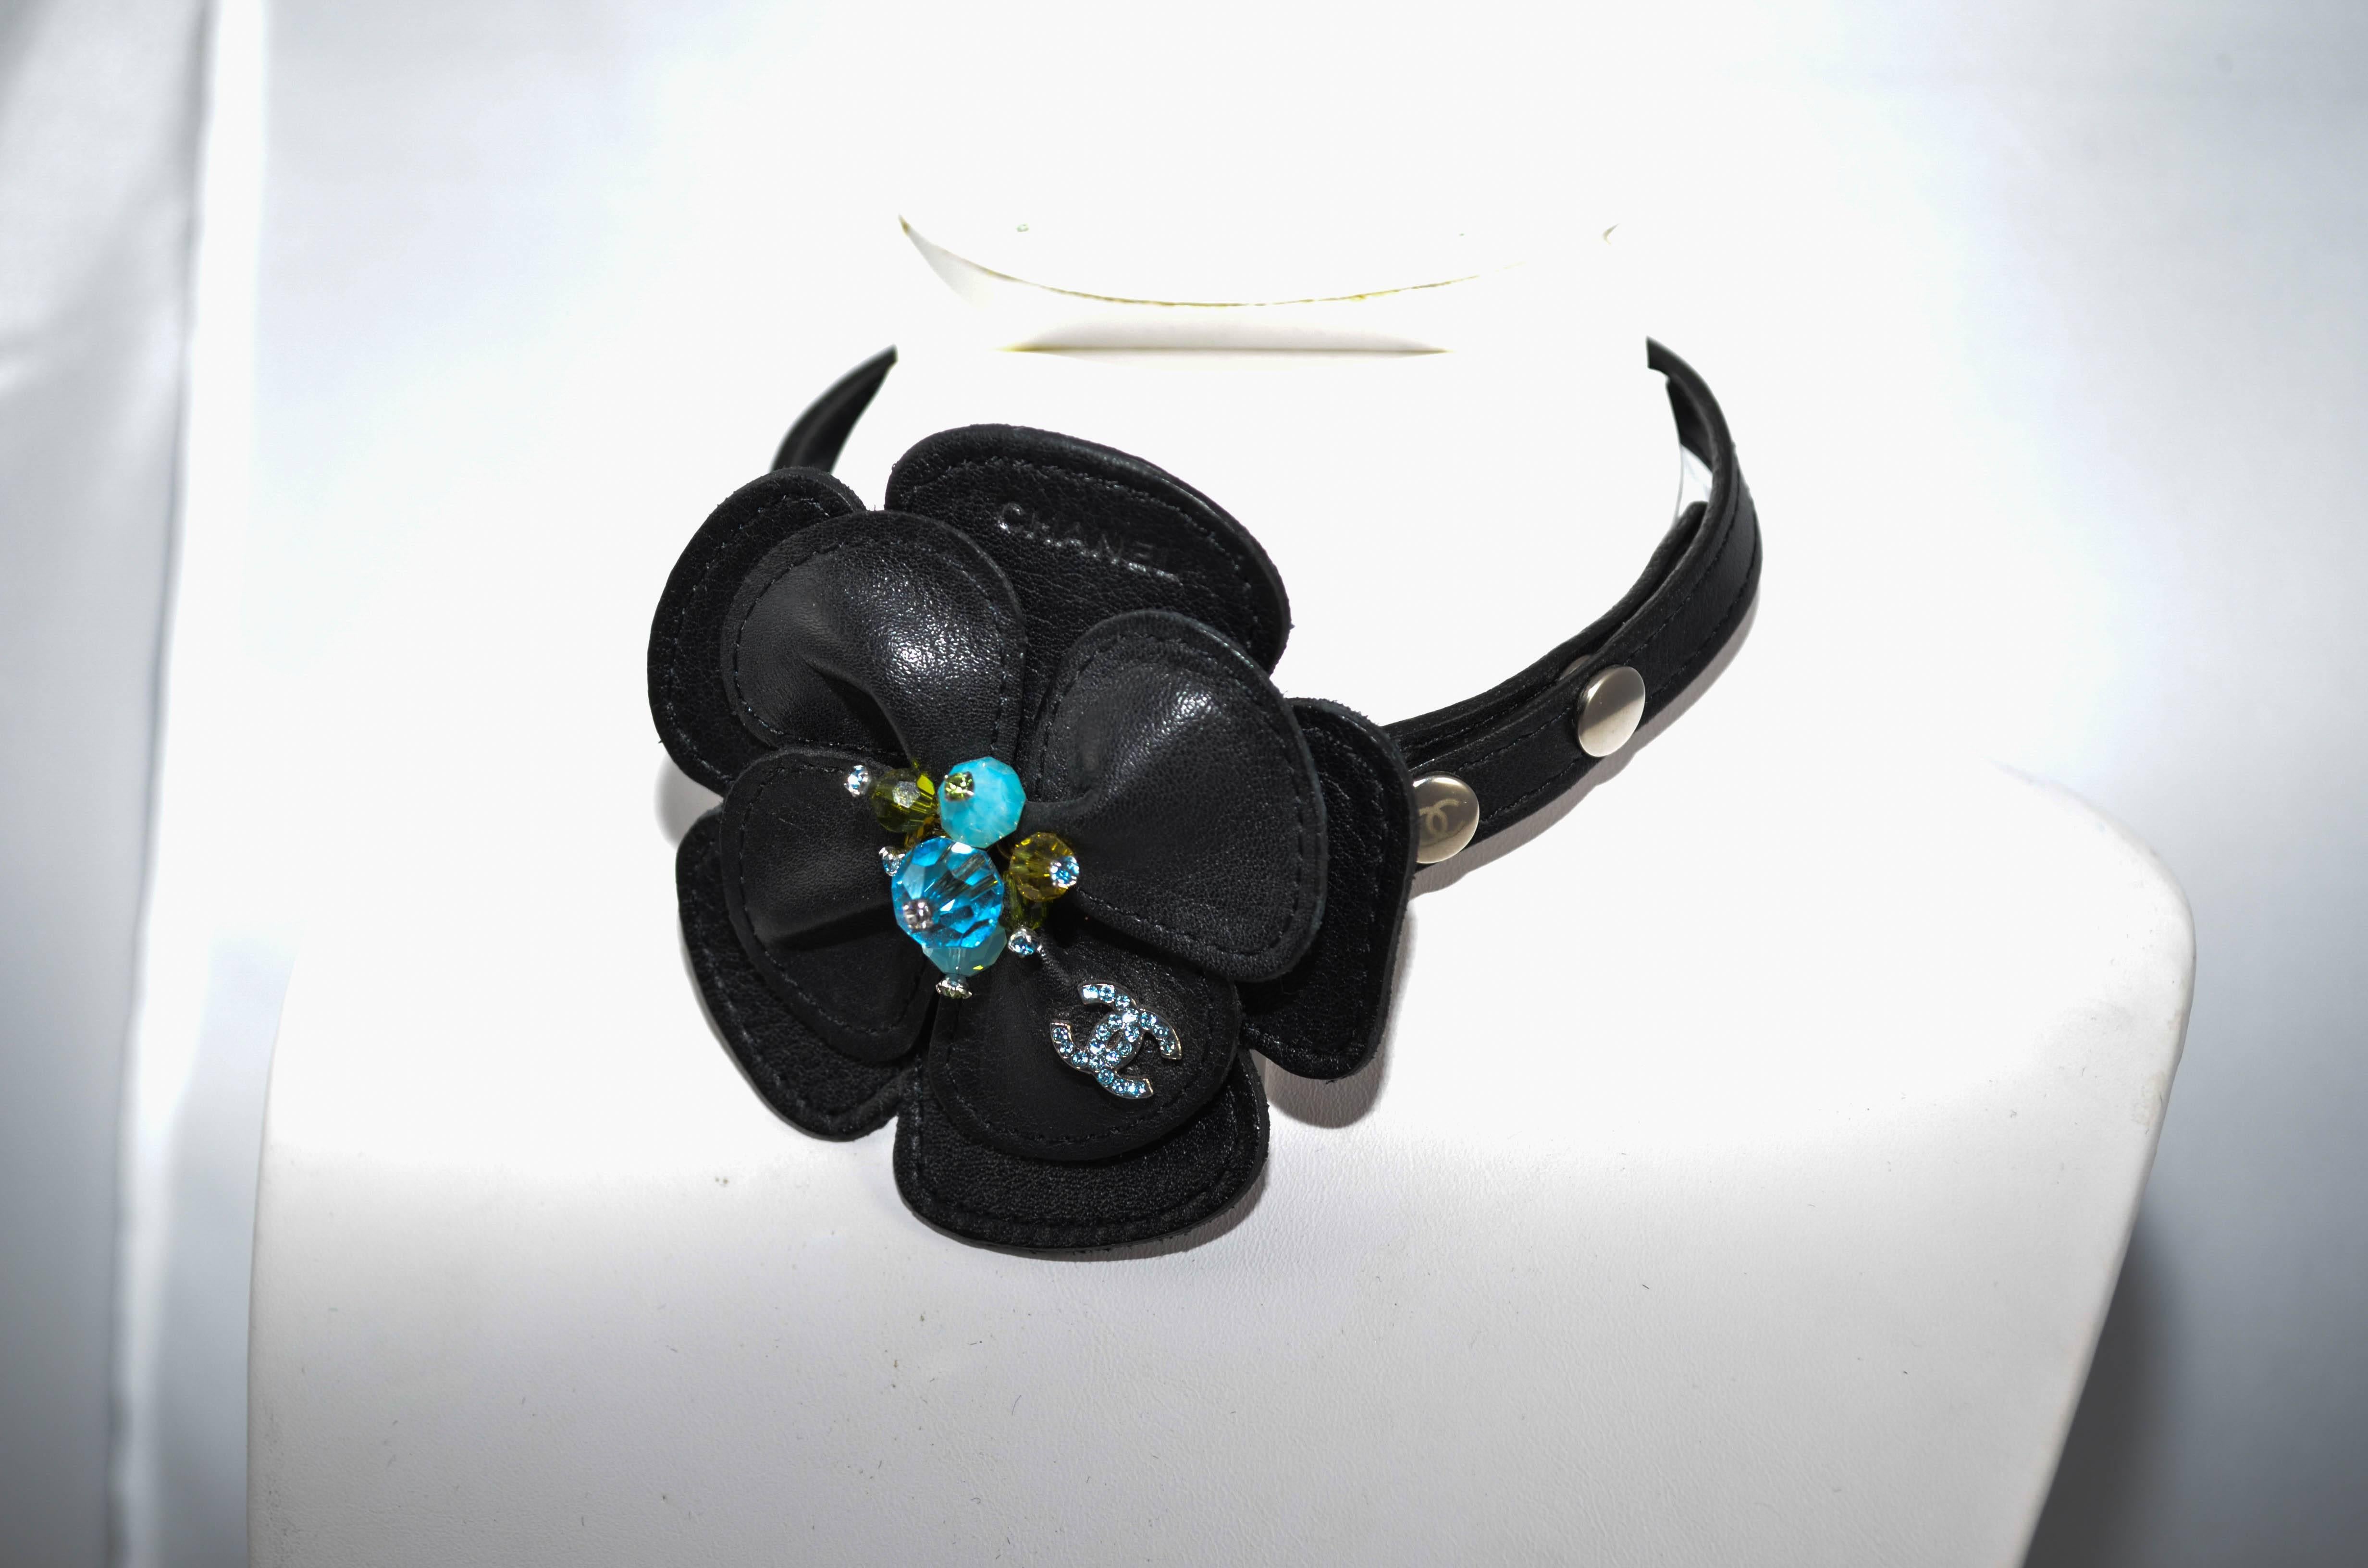 Rare and fabulous Chanel black leather camelia flower choker featuring a three button snap closure, blue and green crystal beads at the center of the flower tipped with blue and green rhinestones, and Chanel's signature CC with silver hardware and